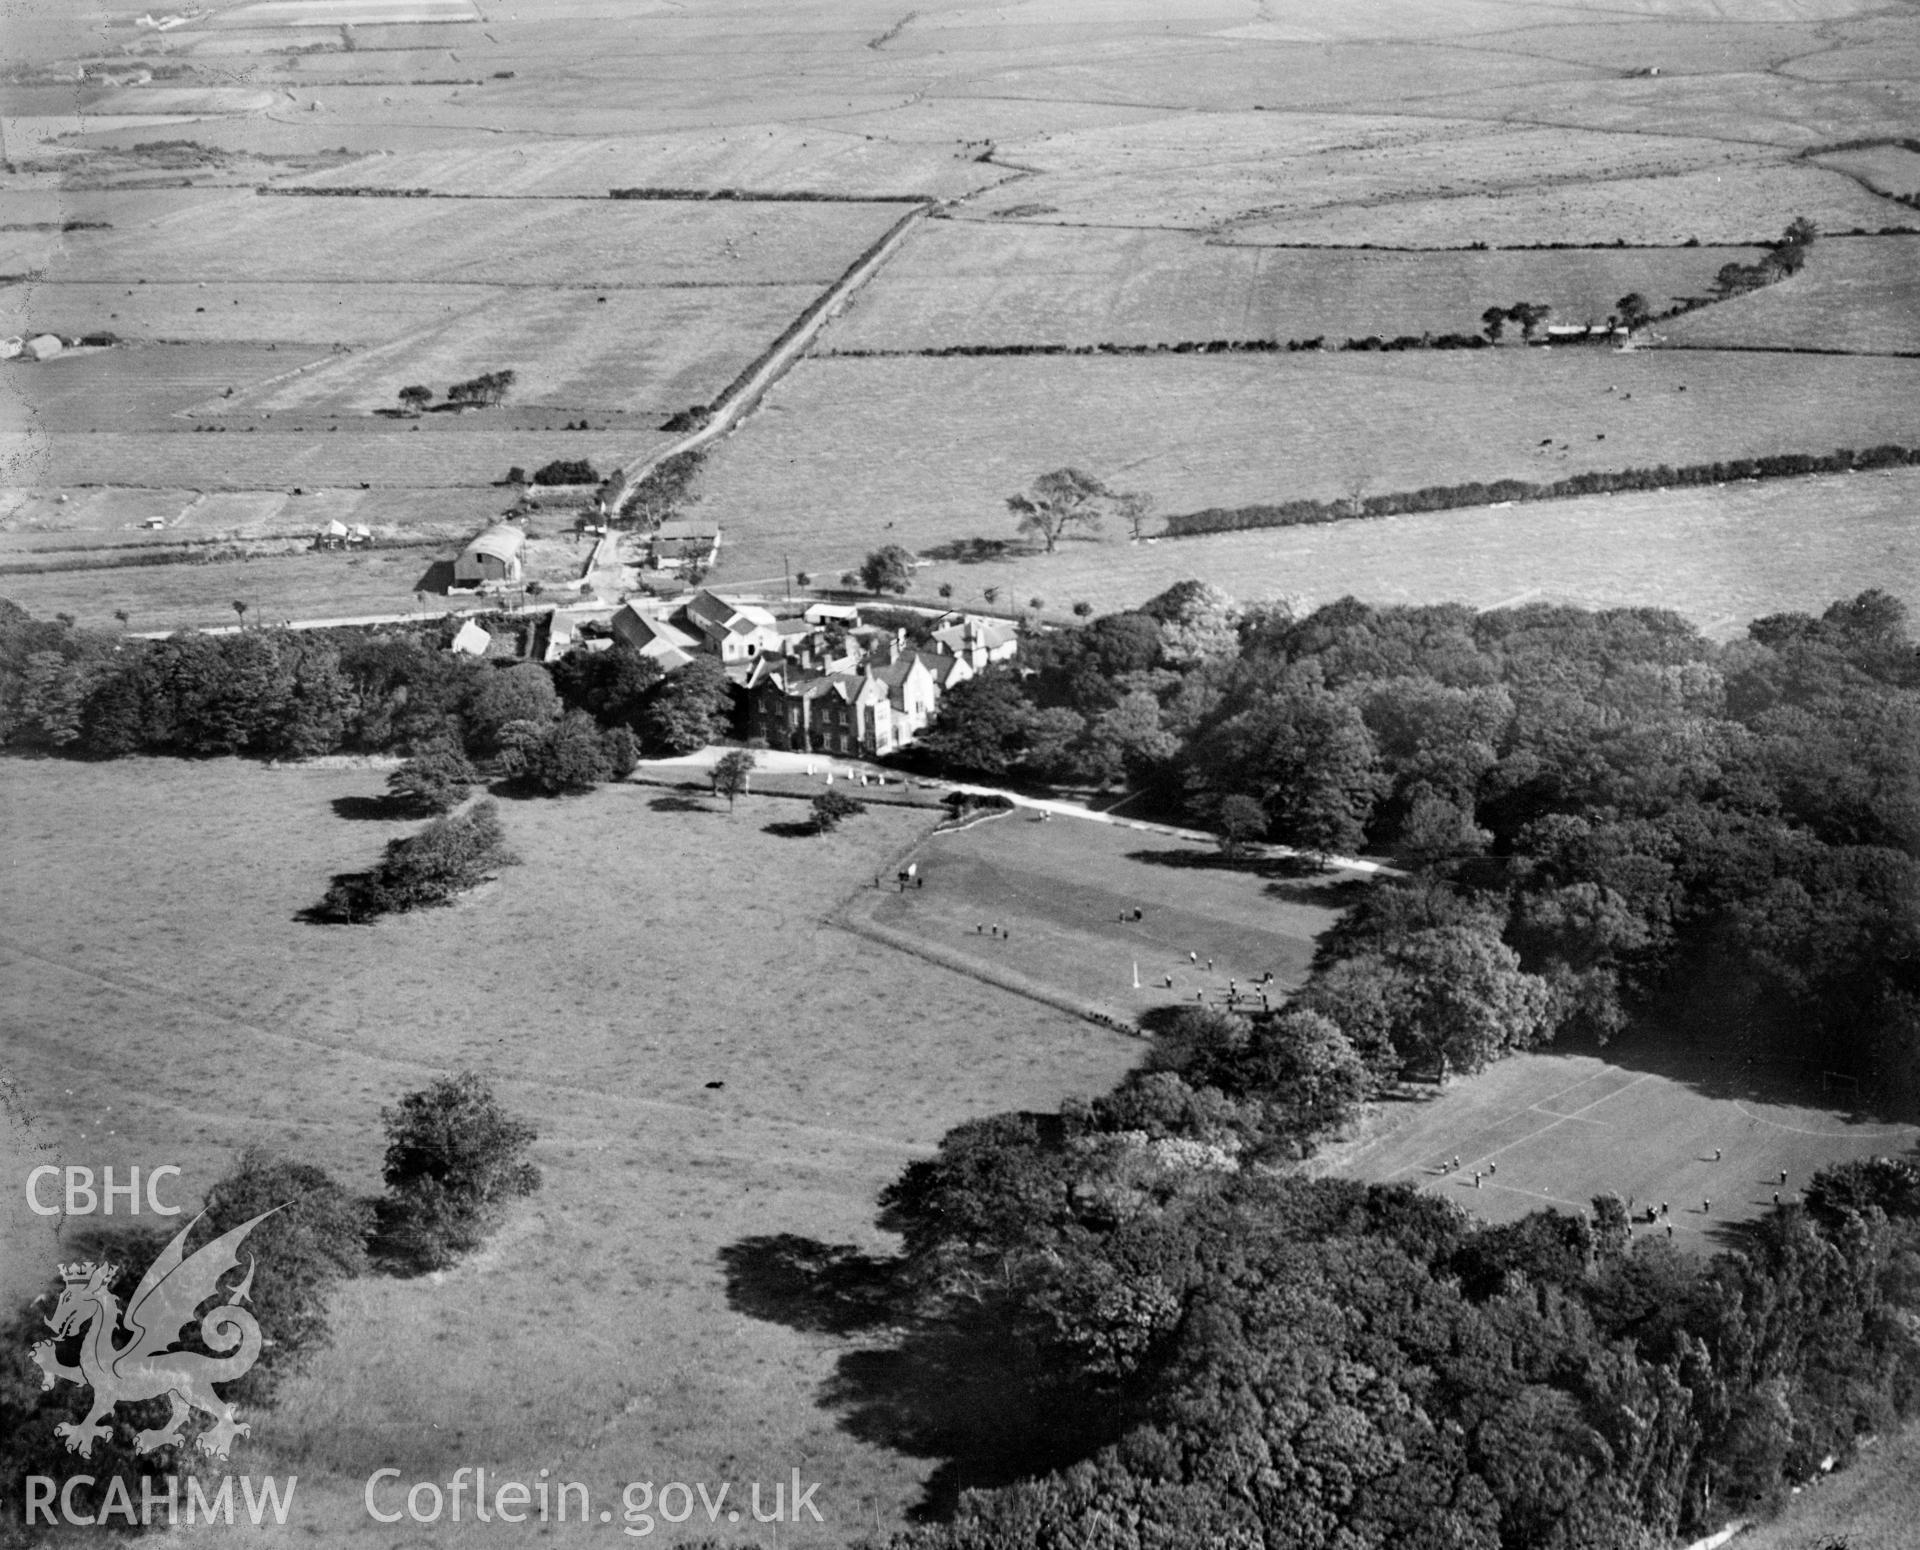 View of Pentre Mawr School, Abergele, taken for Messrs E & J Sales, oblique aerial view. 5?x4? black and white glass plate negative.